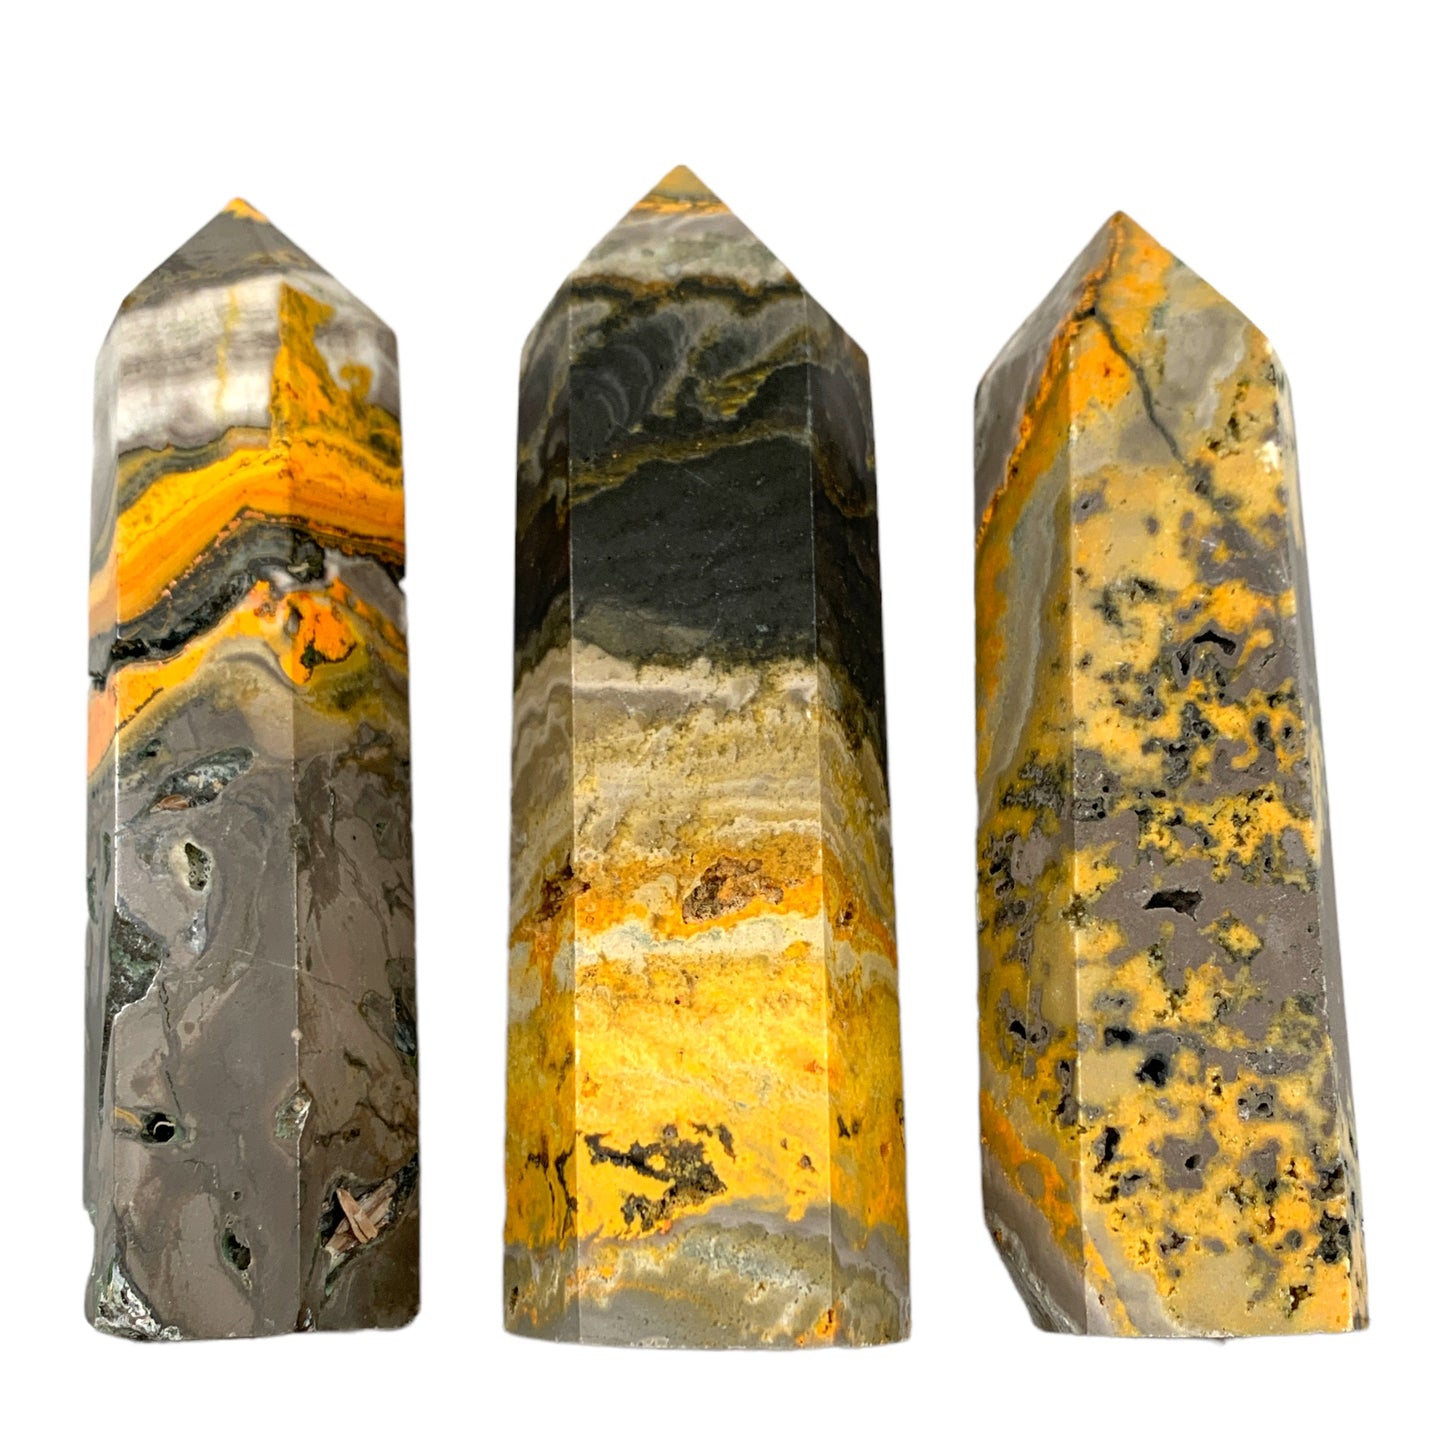 Bumble Bee - Polished Points - 44 - 135mm - Price per gram - Example 80 Grams is $28.80 - China - NEW1021